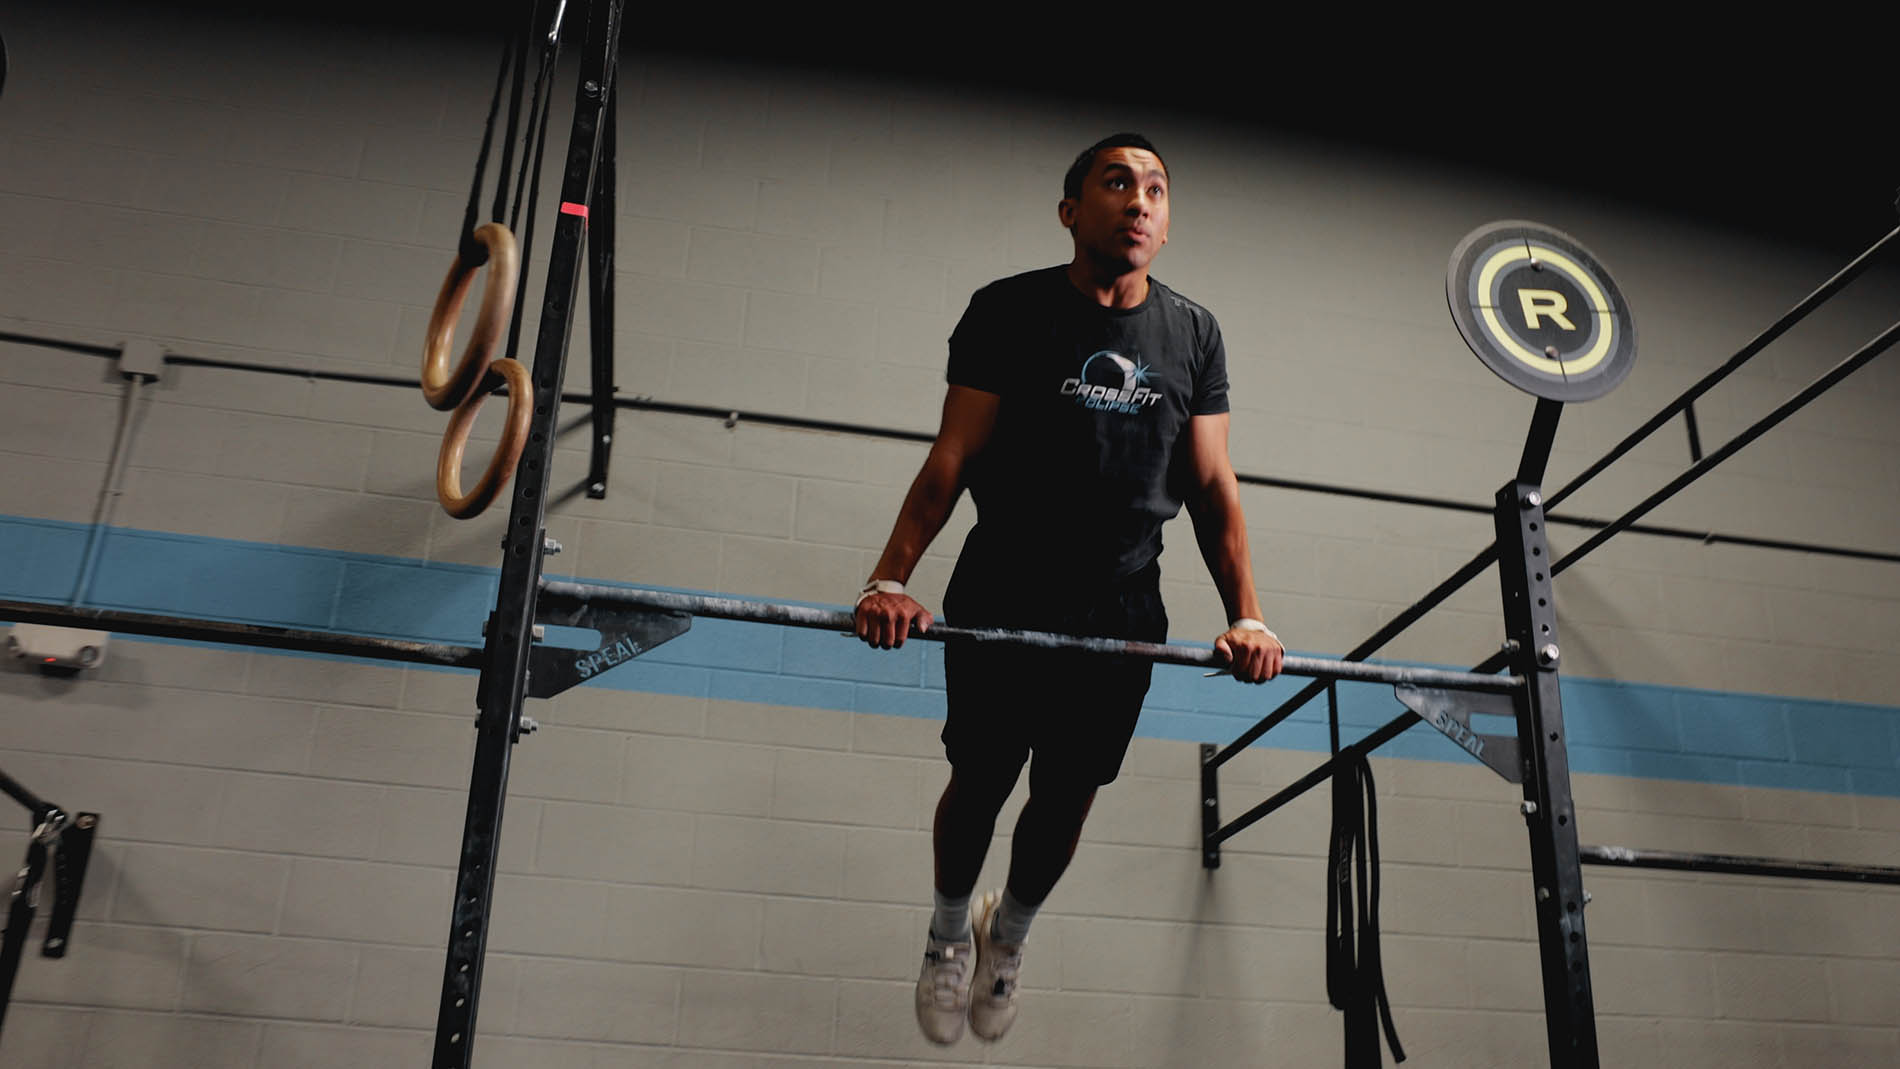 A man performing a muscle-up exercise at a gym, focusing intently as he lifts himself above a horizontal bar, with gymnastic rings and a neon sign promoting pelvic health in the background.